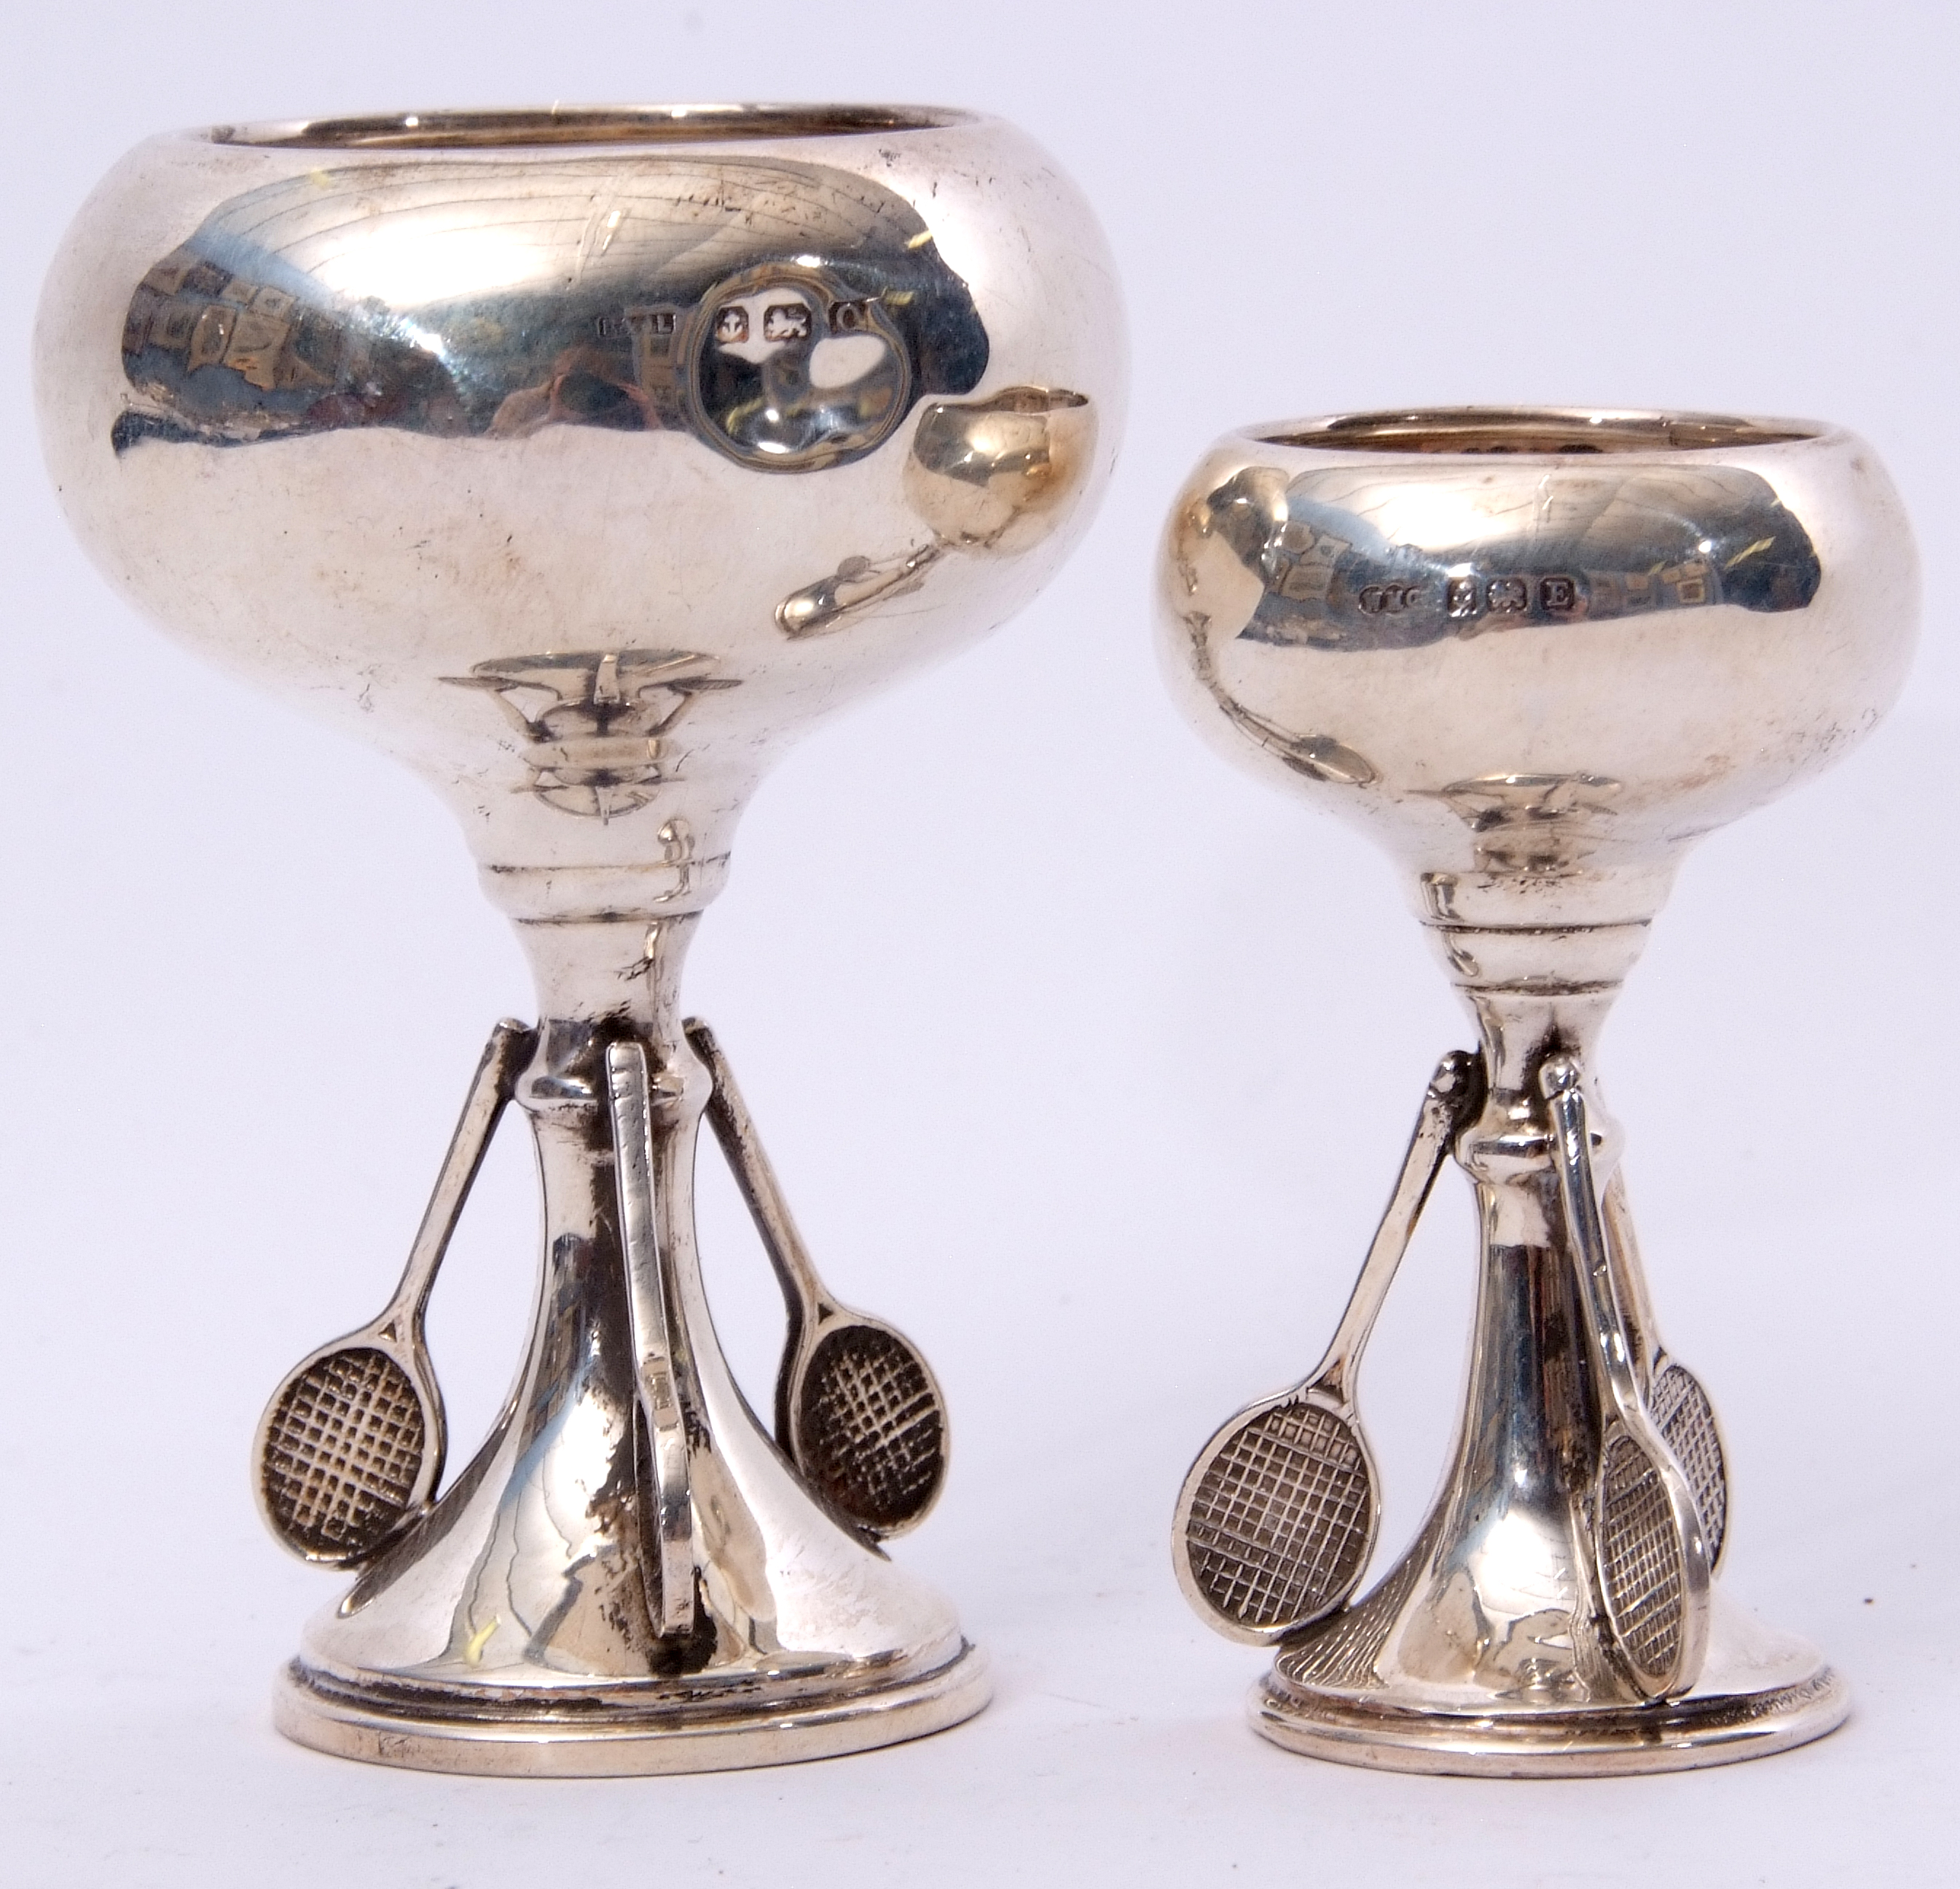 George VI small tennis presentation cup featuring three tennis rackets adjoined to the stem and